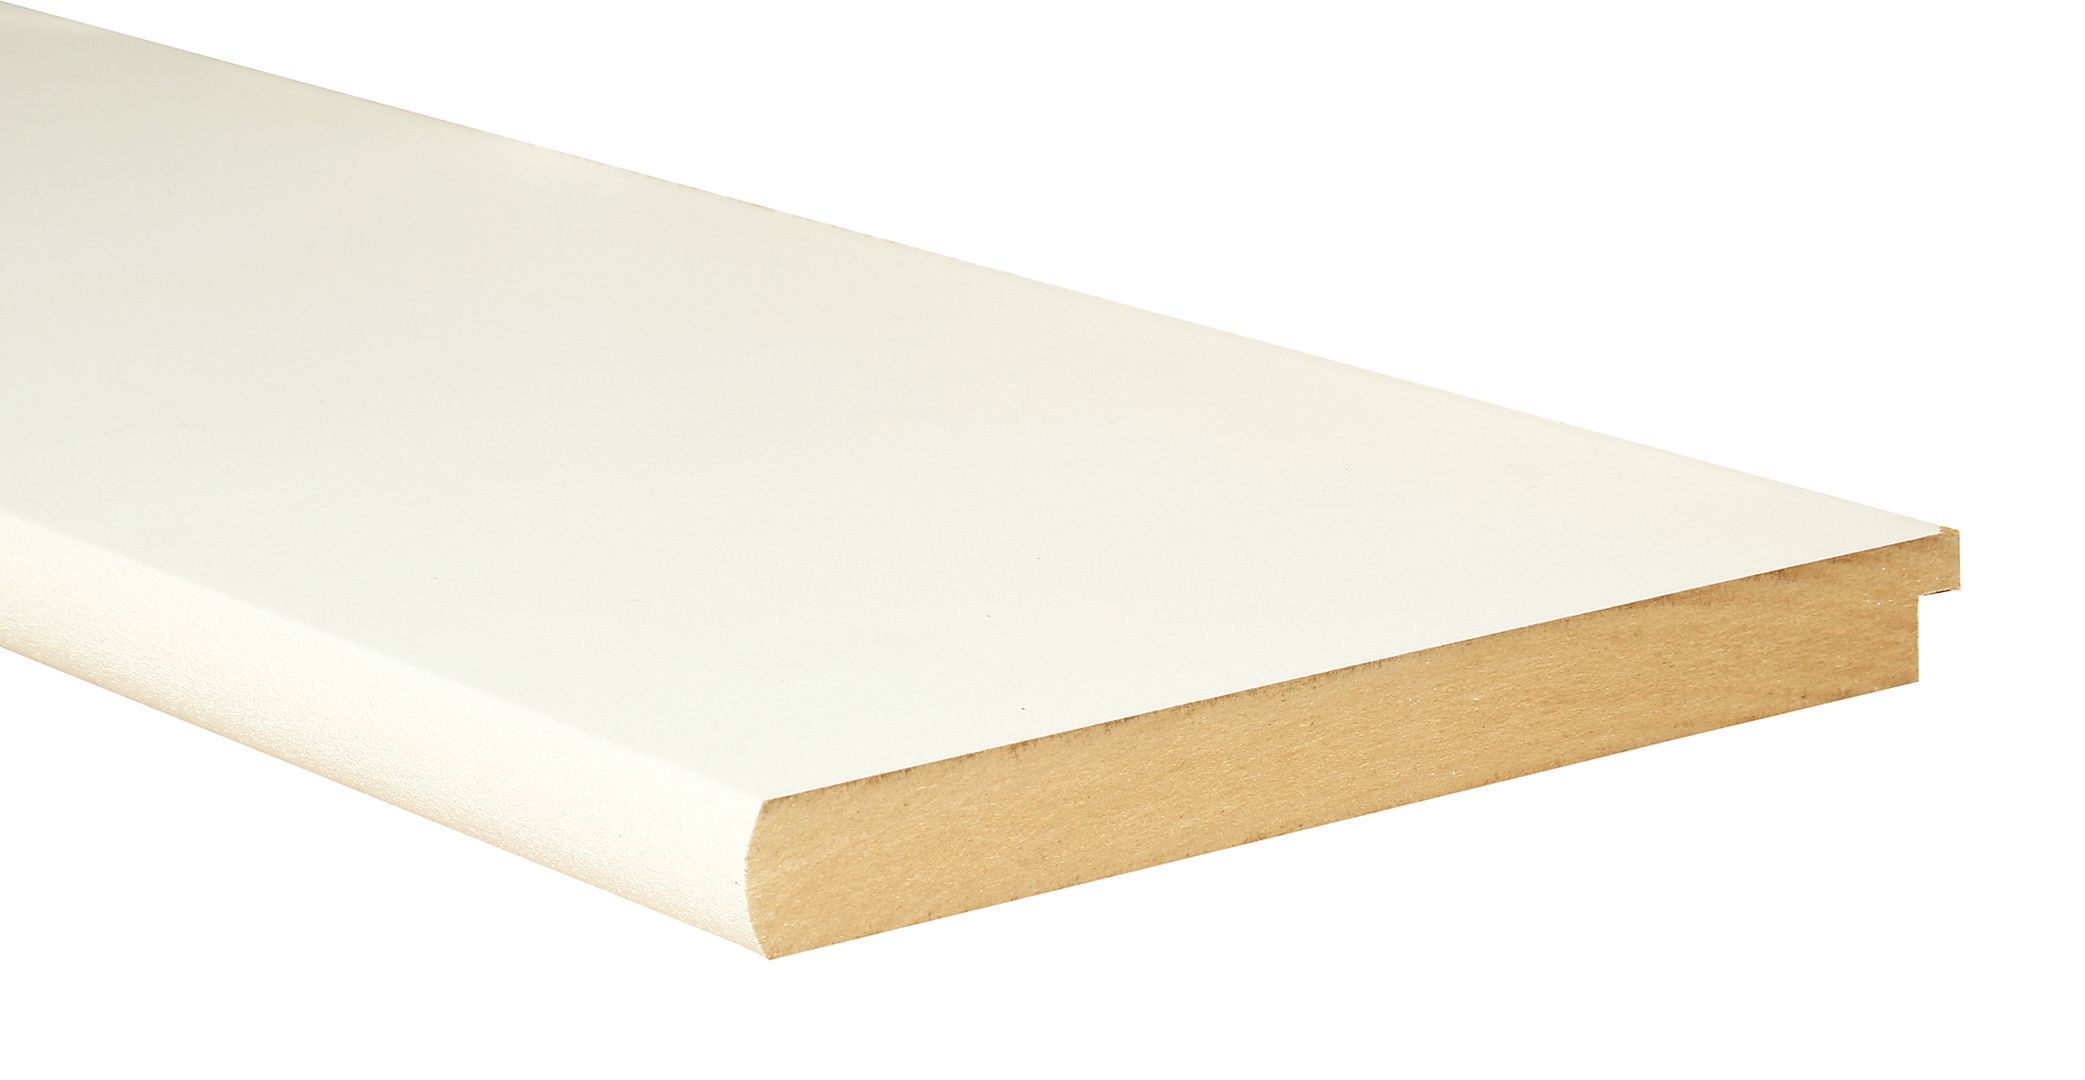 Image of Wickes Bullnose Primed MDF Window Board - 22mm x 219mm x 2700mm